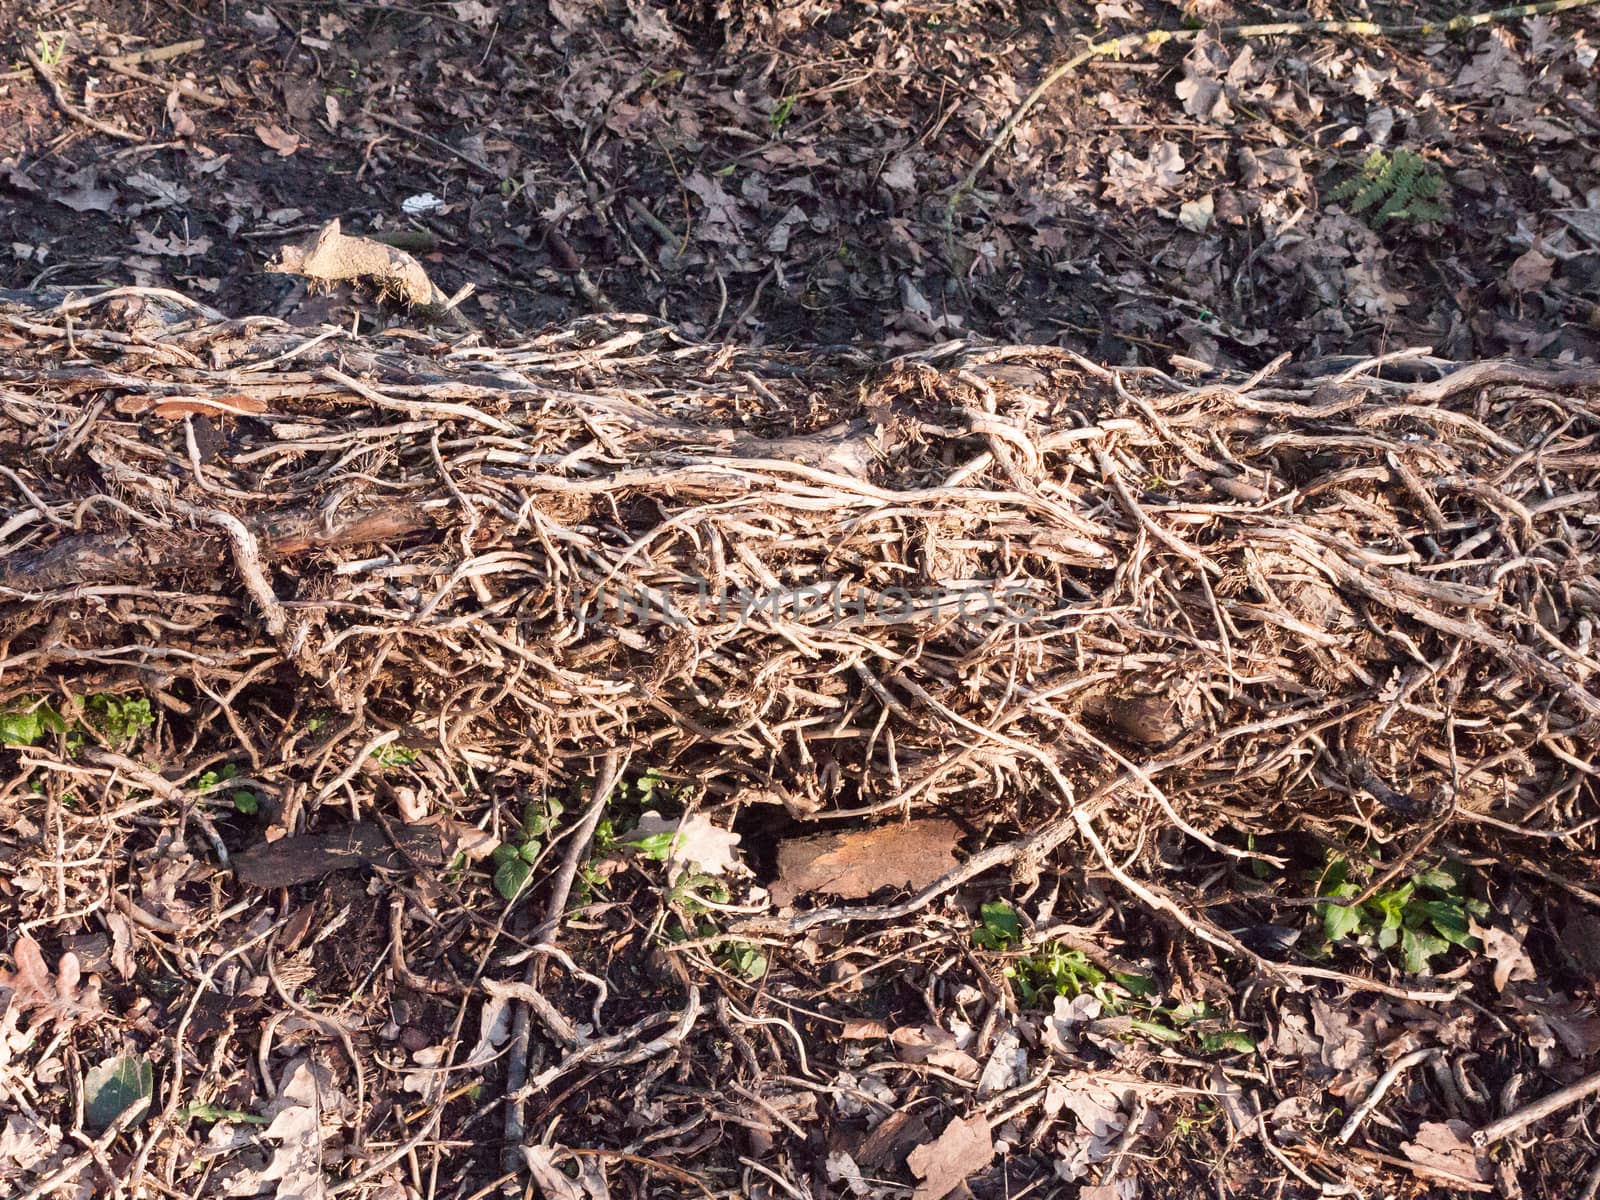 close up tangled up vines on tree fallen forest floor dead by callumrc